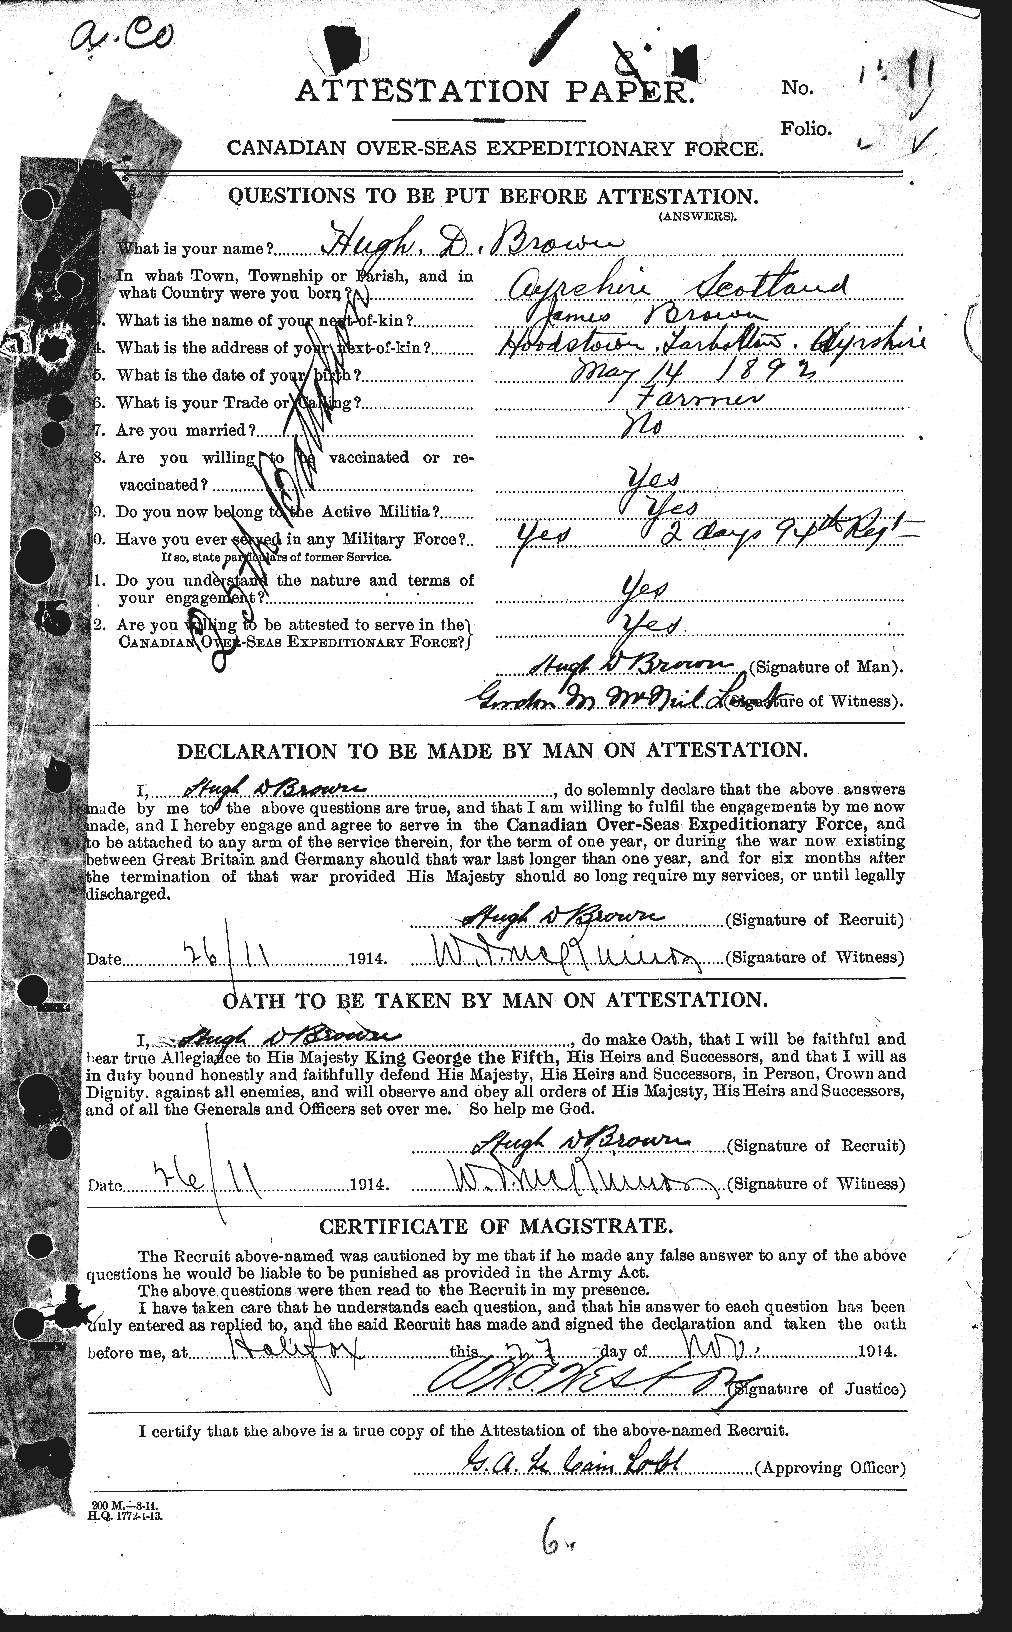 Personnel Records of the First World War - CEF 265644a